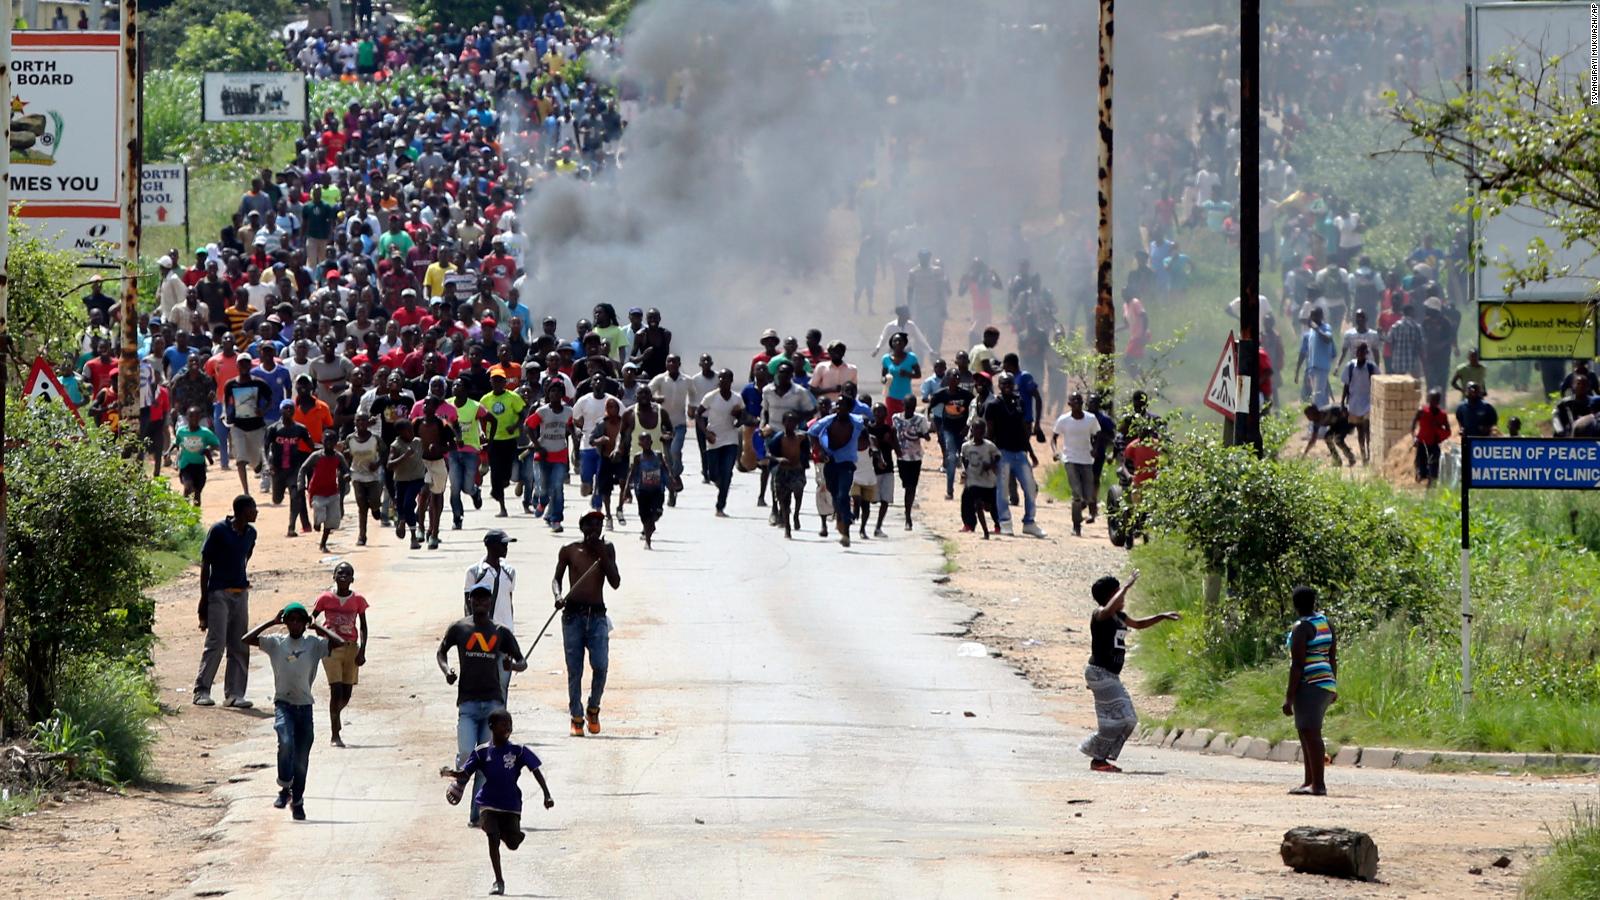 Zimbabweans Say Social Media Blocked In Wake Of Violent Protests Cnn 4911